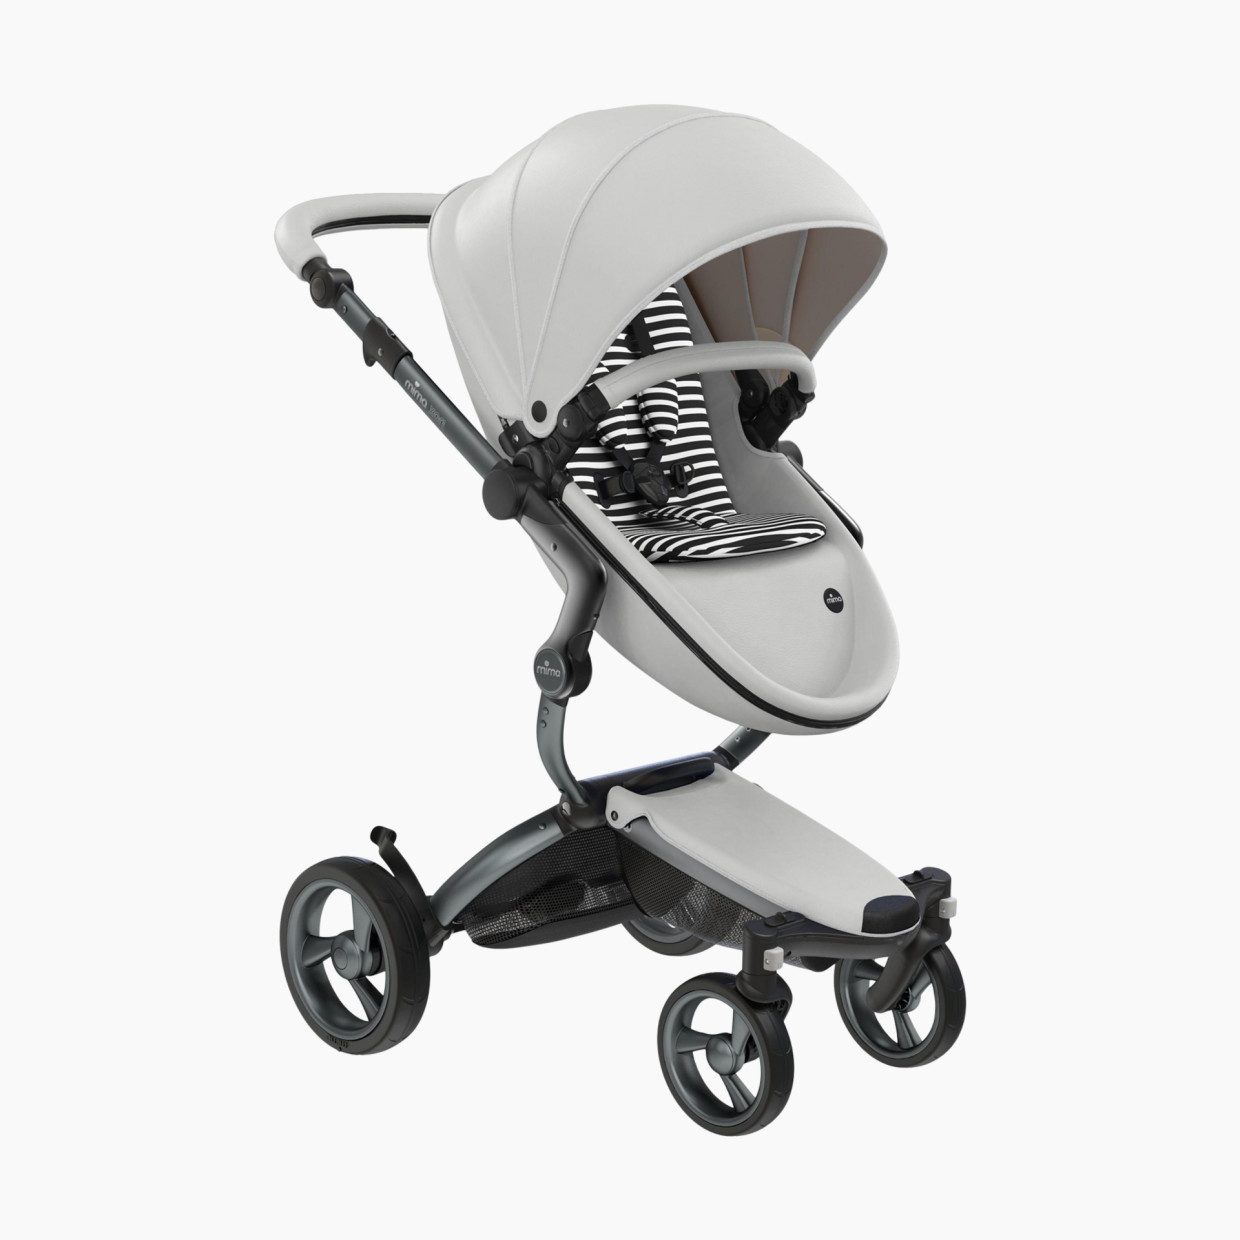 Mima Xari Chassis Stroller with Reversible Reclining Seat & Carrycot - Snow White Seat Box/Black & White Starter Pack.